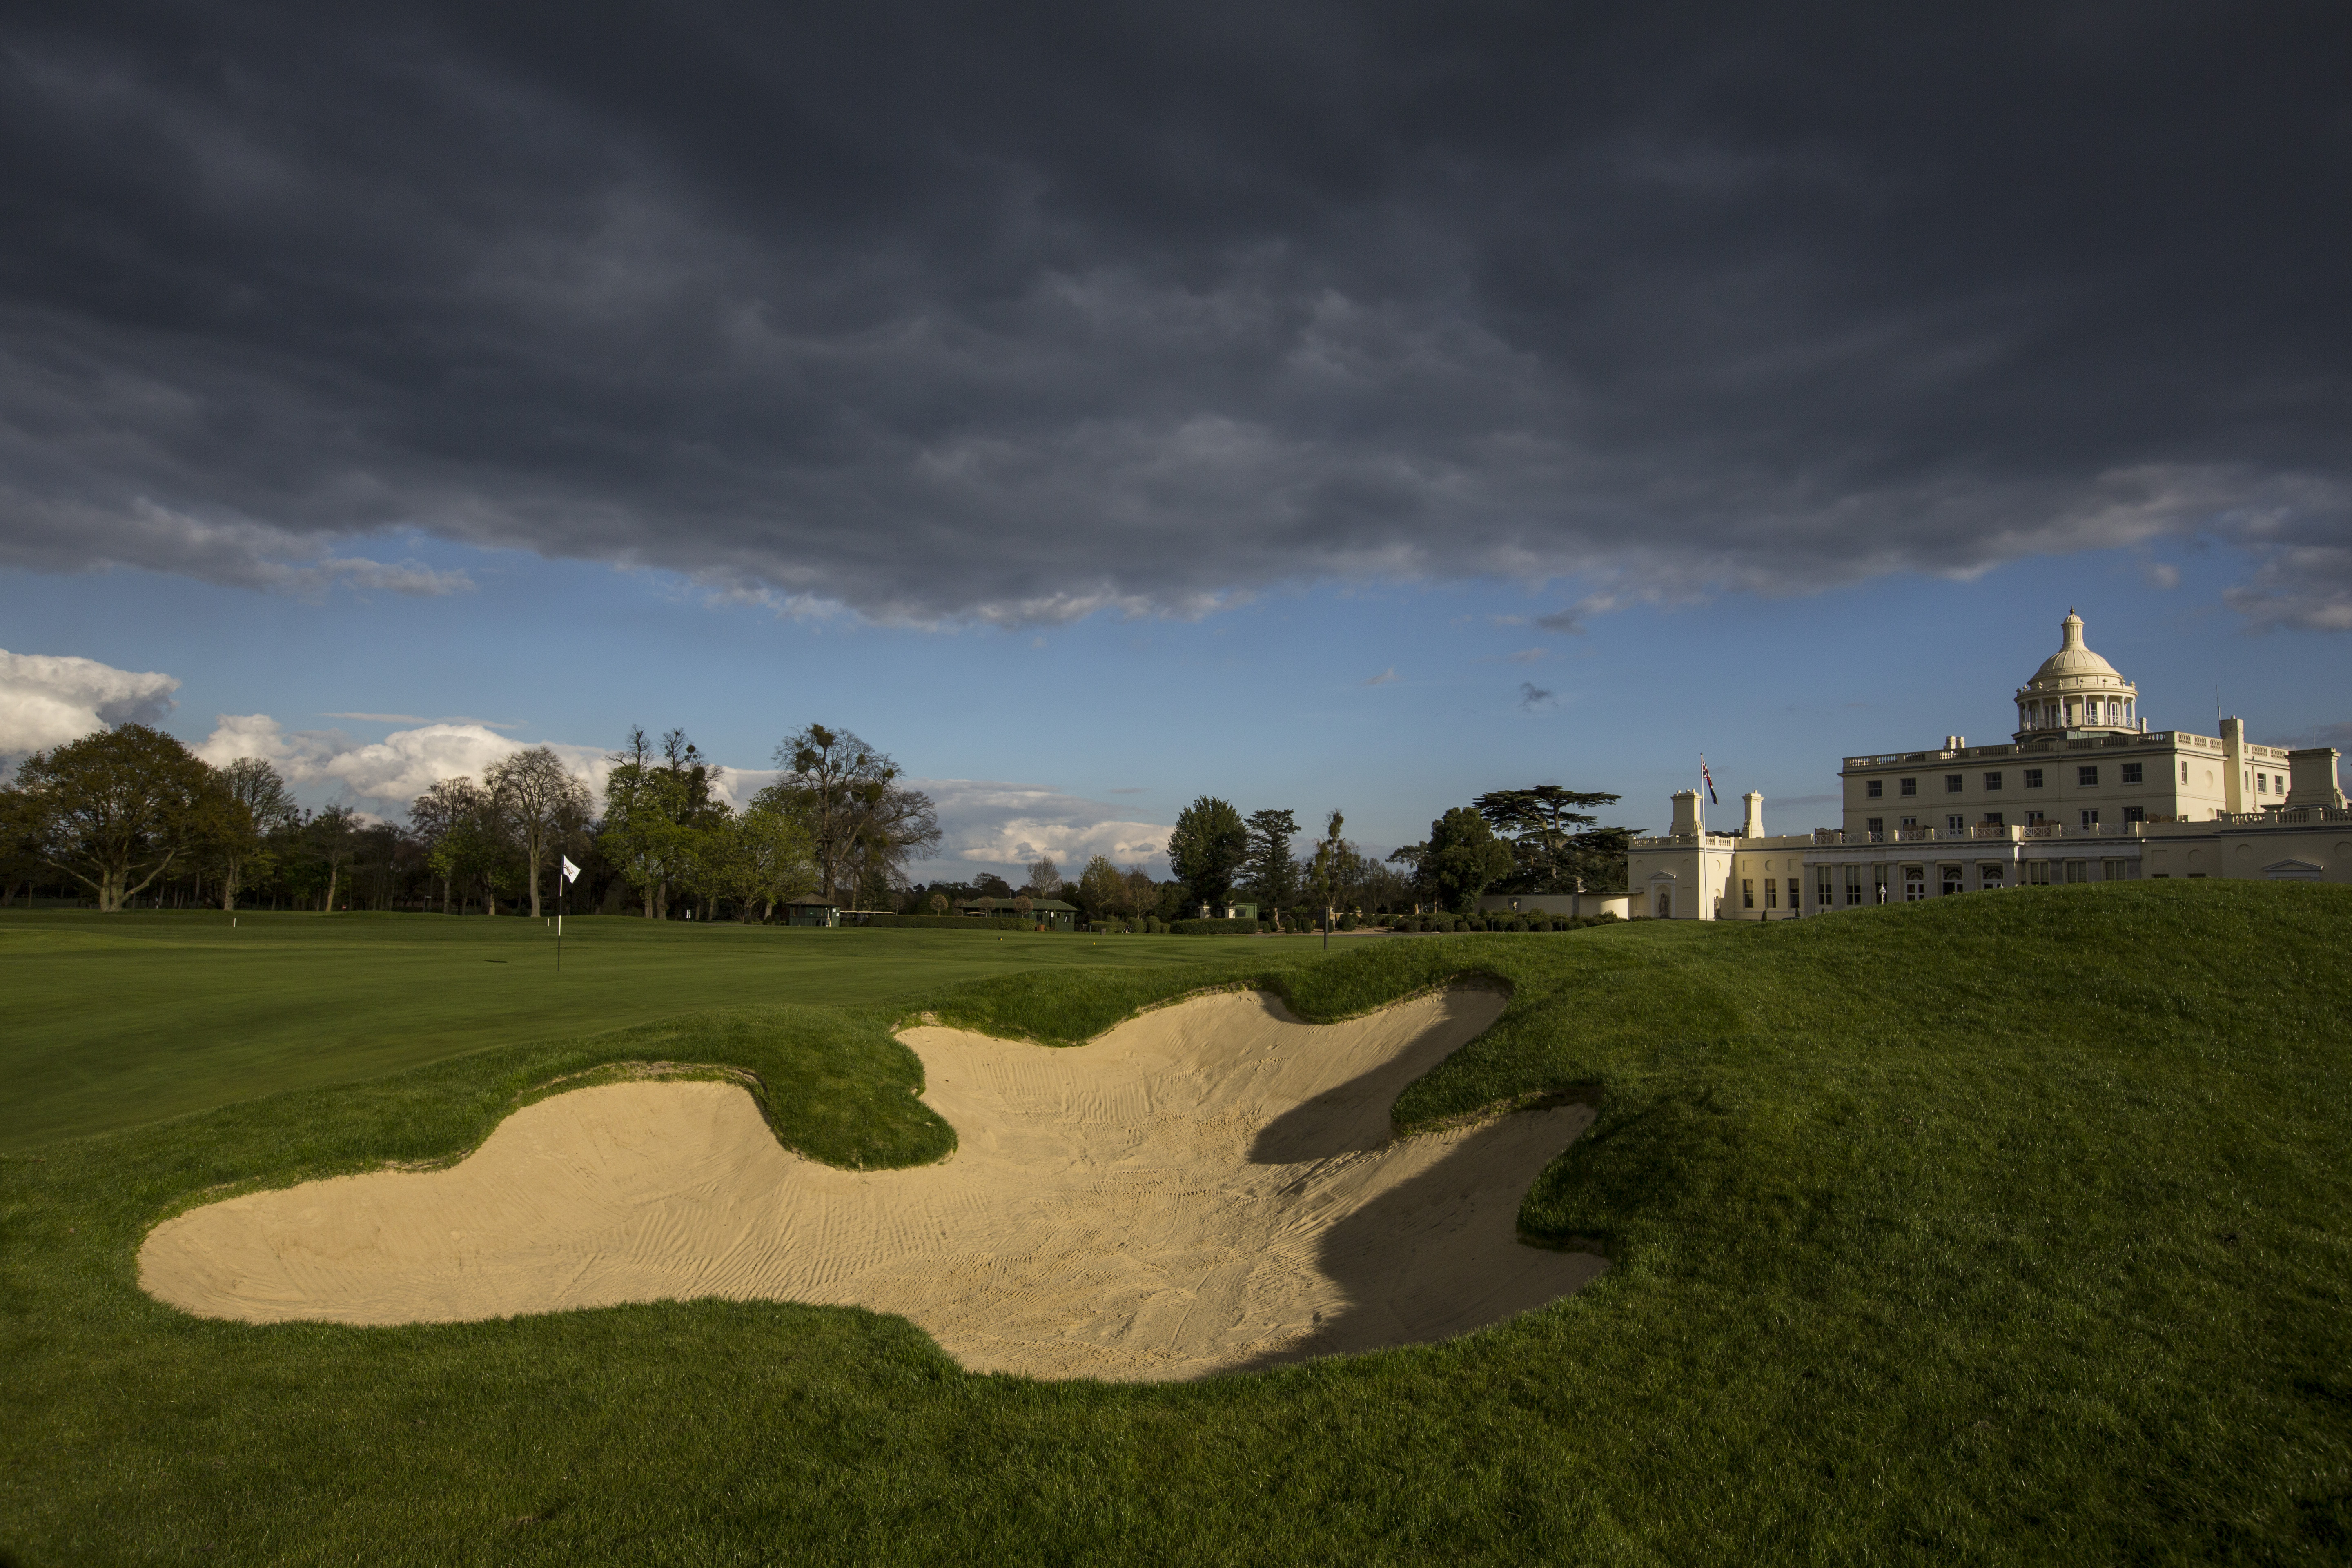 Stoke Park reopens renovated front nine 